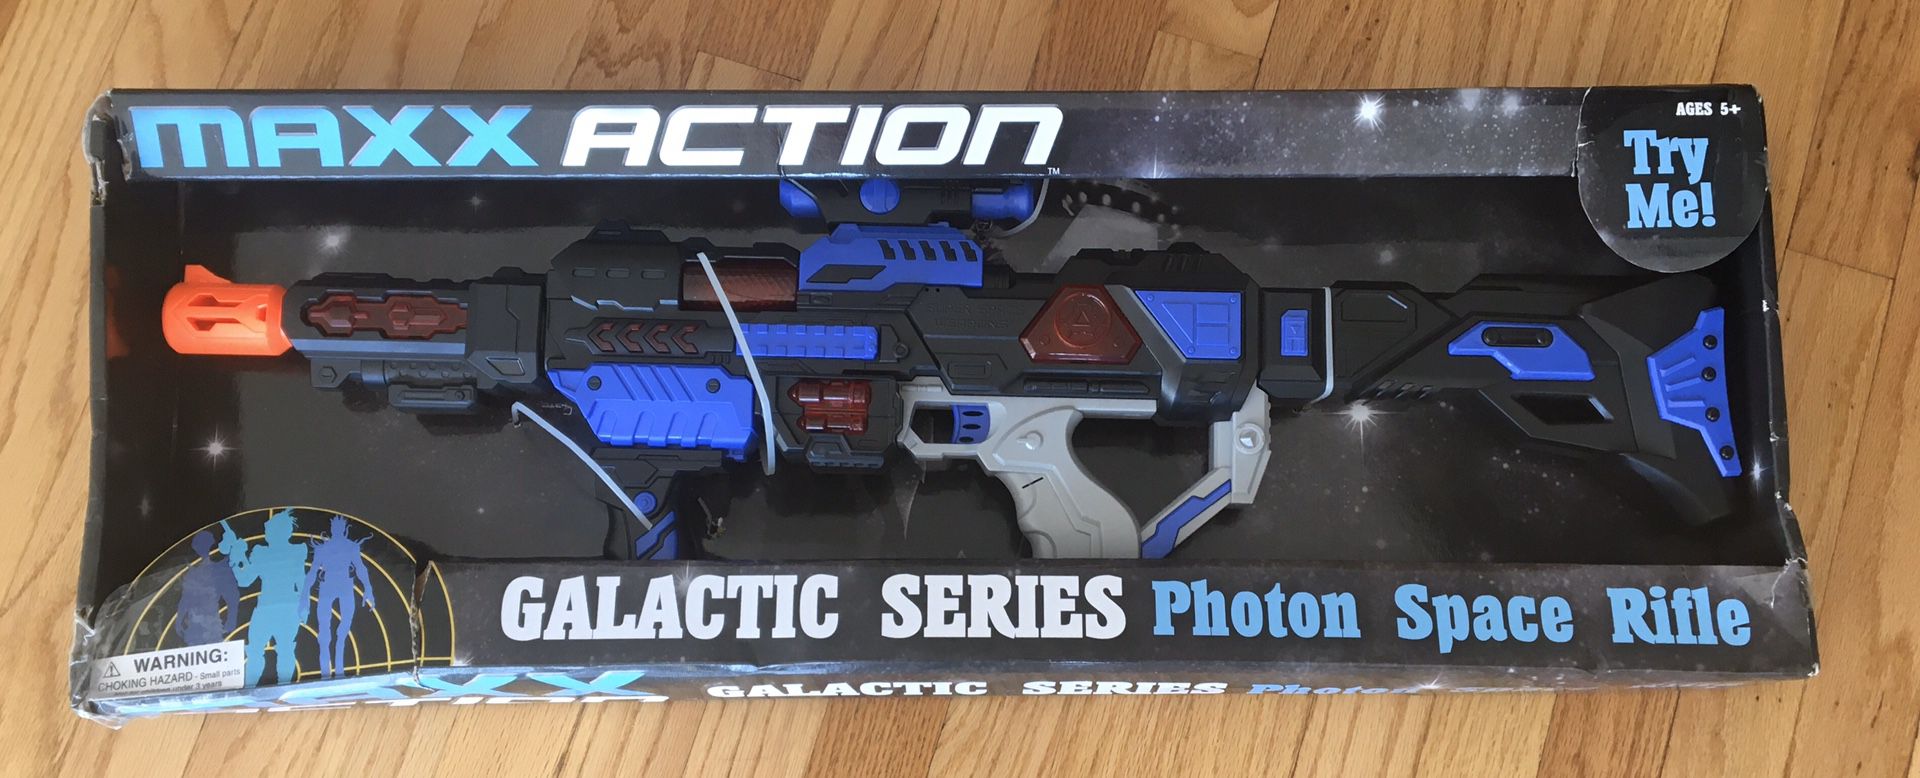 Maxx action galactic series photon space rifle with sound and light